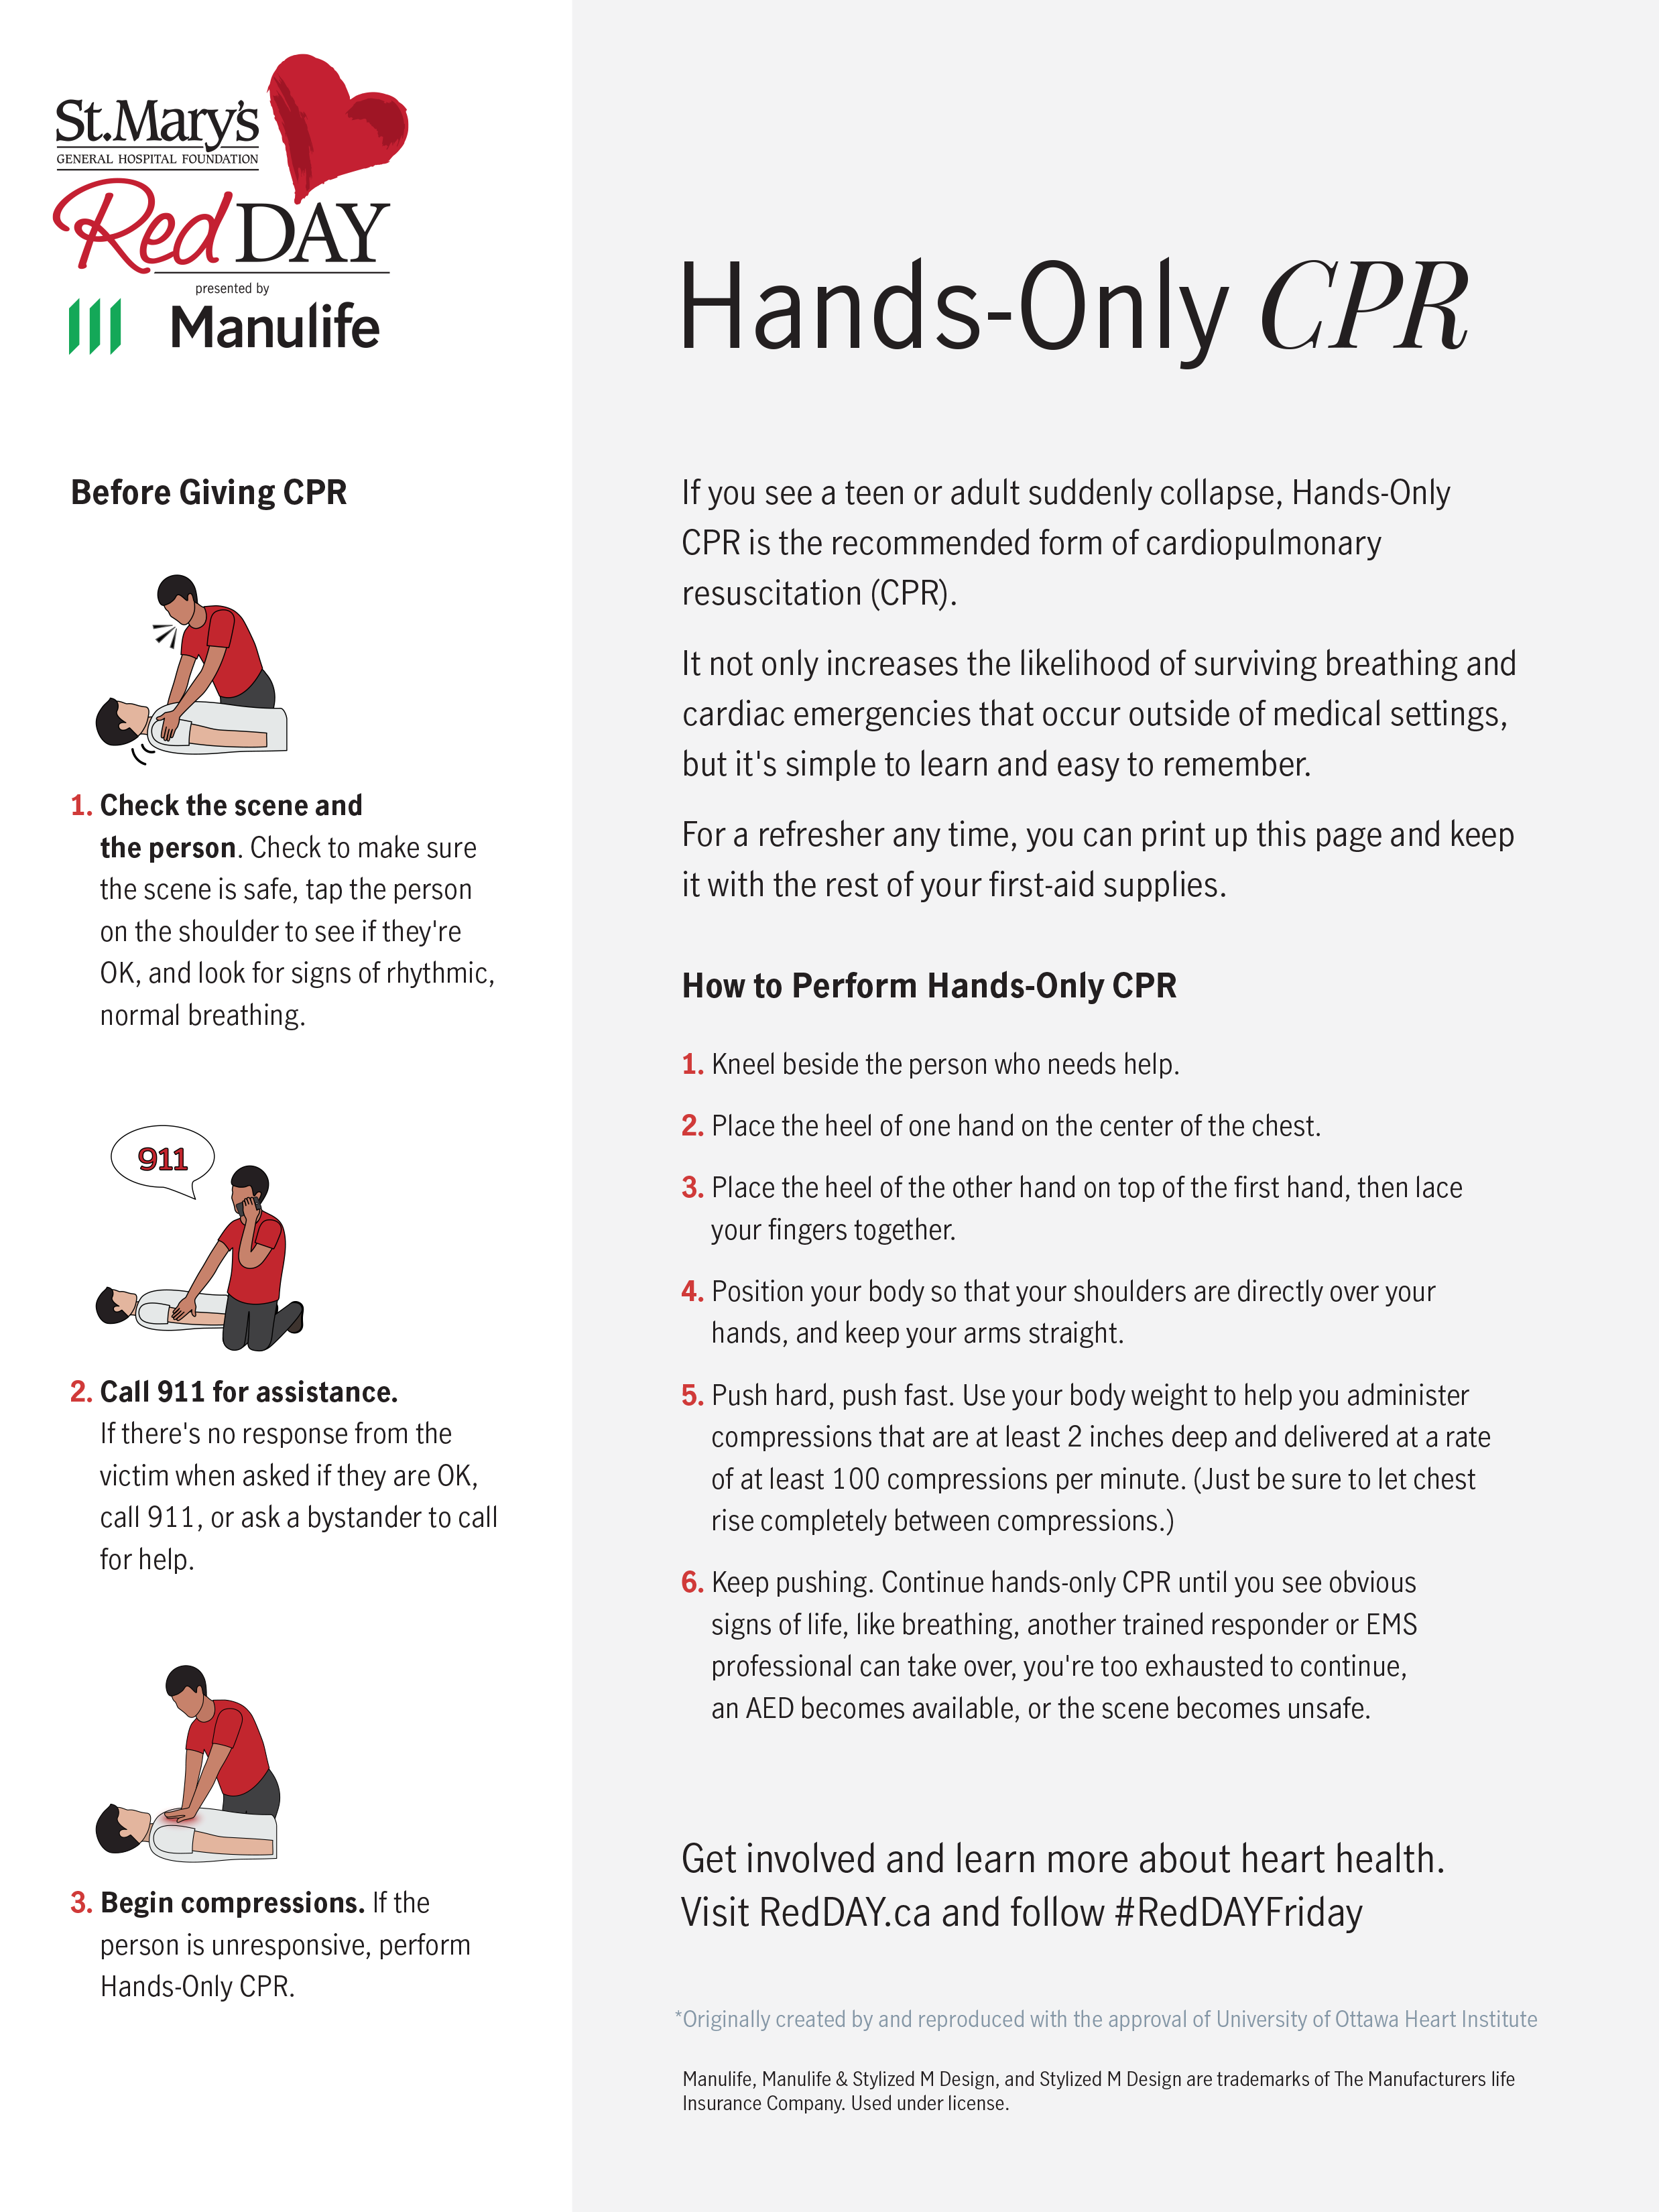 RedDAY Hands-Only CPR